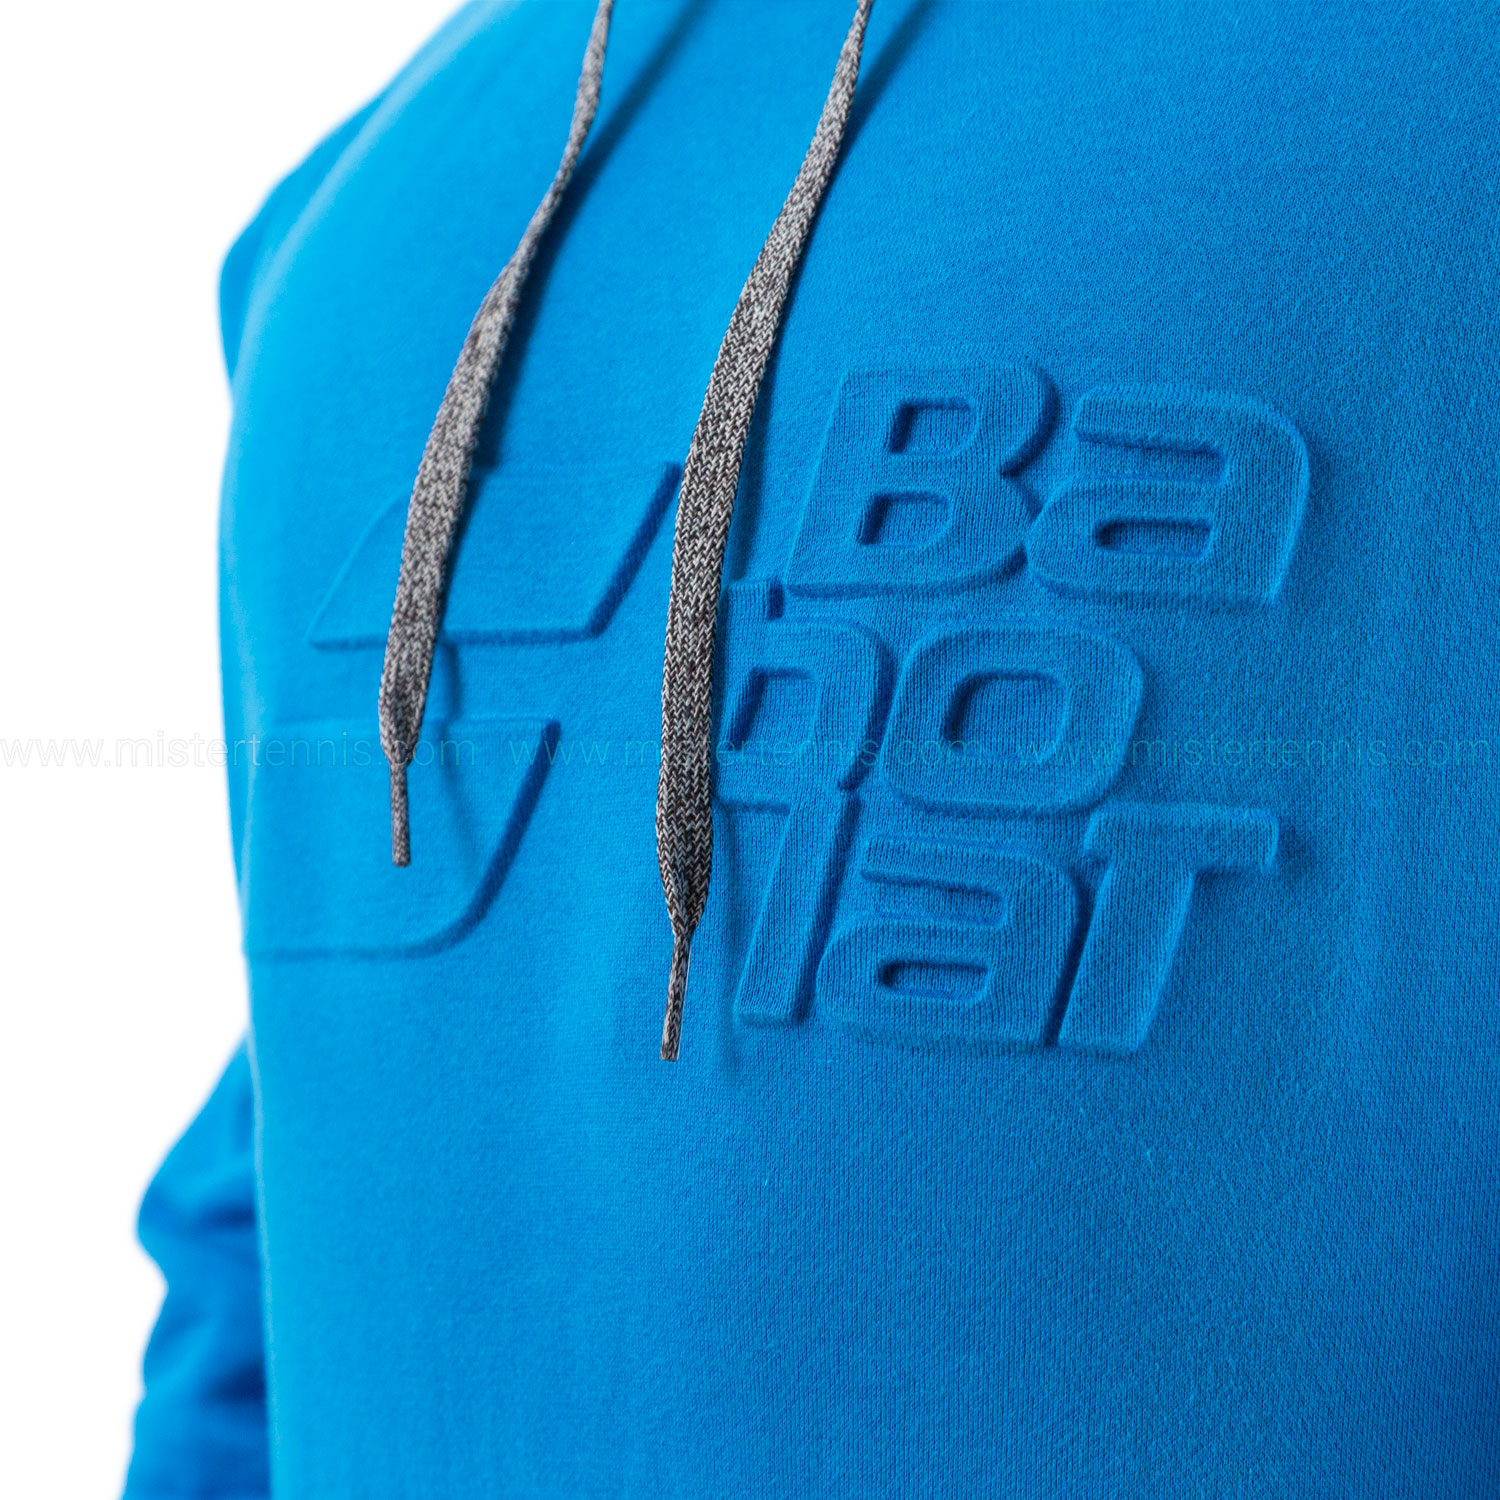 Babolat Exercise Hoodie - Blue Aster